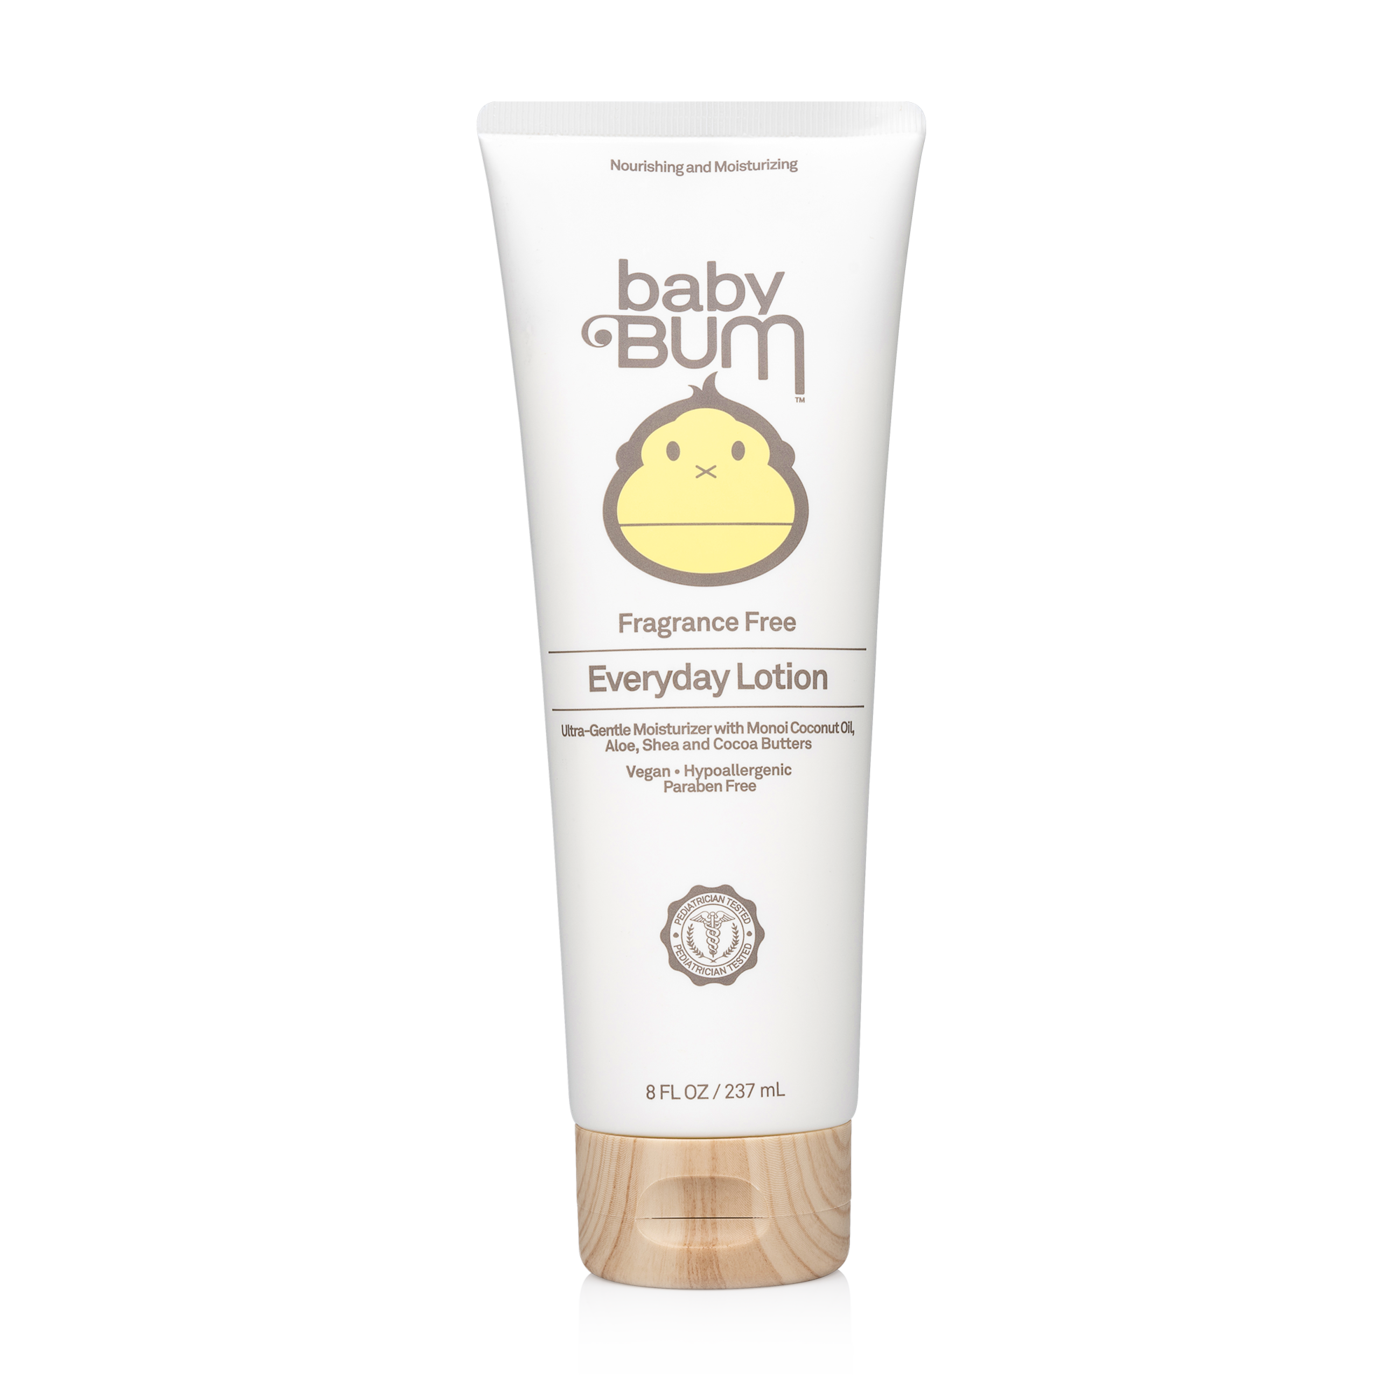 Baby_Bum_Everyday_Lotion_Fragrance_Free_8_OZ_Front_21bea460-92f5-4422-919c-7c90a9bdb501_1400x1400